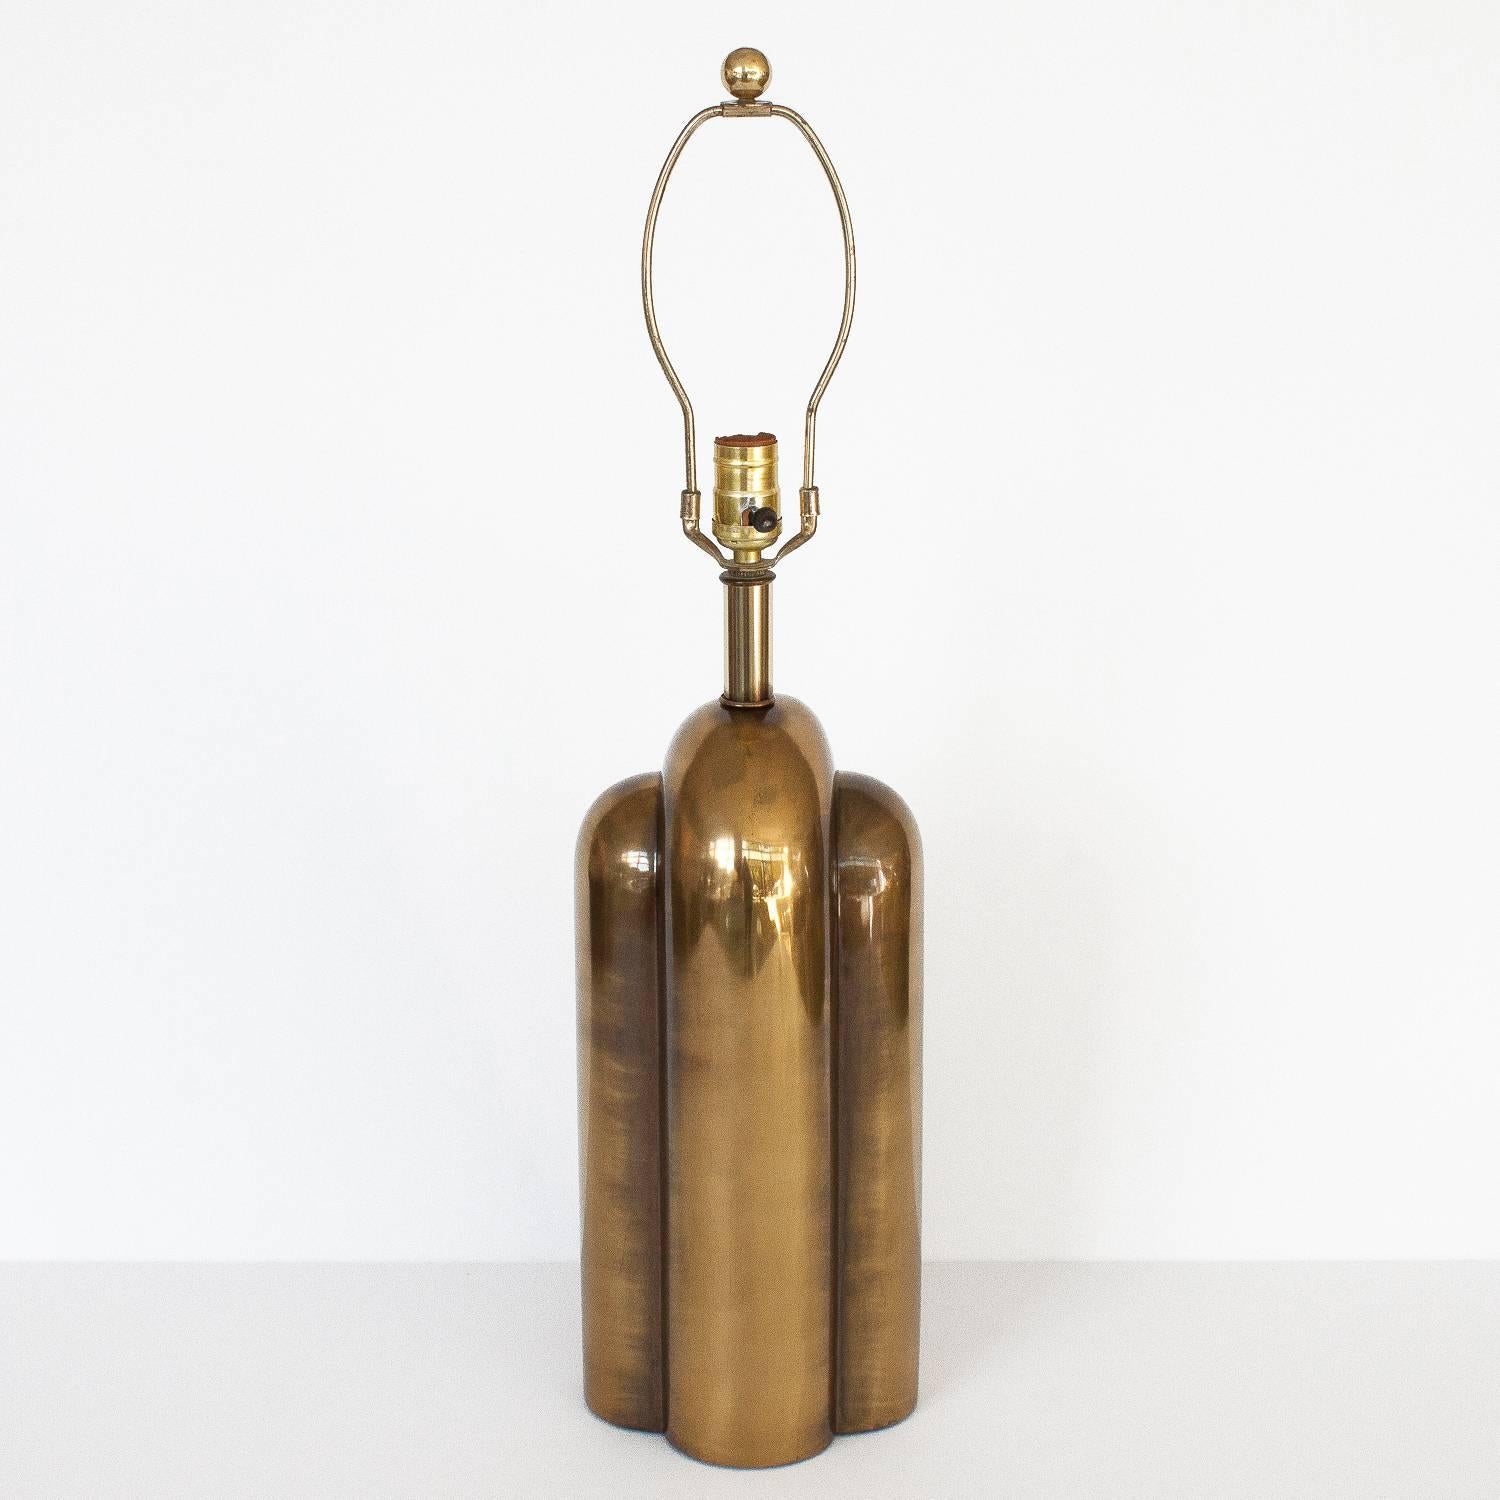 1970s Westwood industries modernist lamp with a streamlined machine aged brass or bronze form. Solid brass ball finial. Takes one standard light bulb. Working condition. Sold sans shade.

Base measures 15